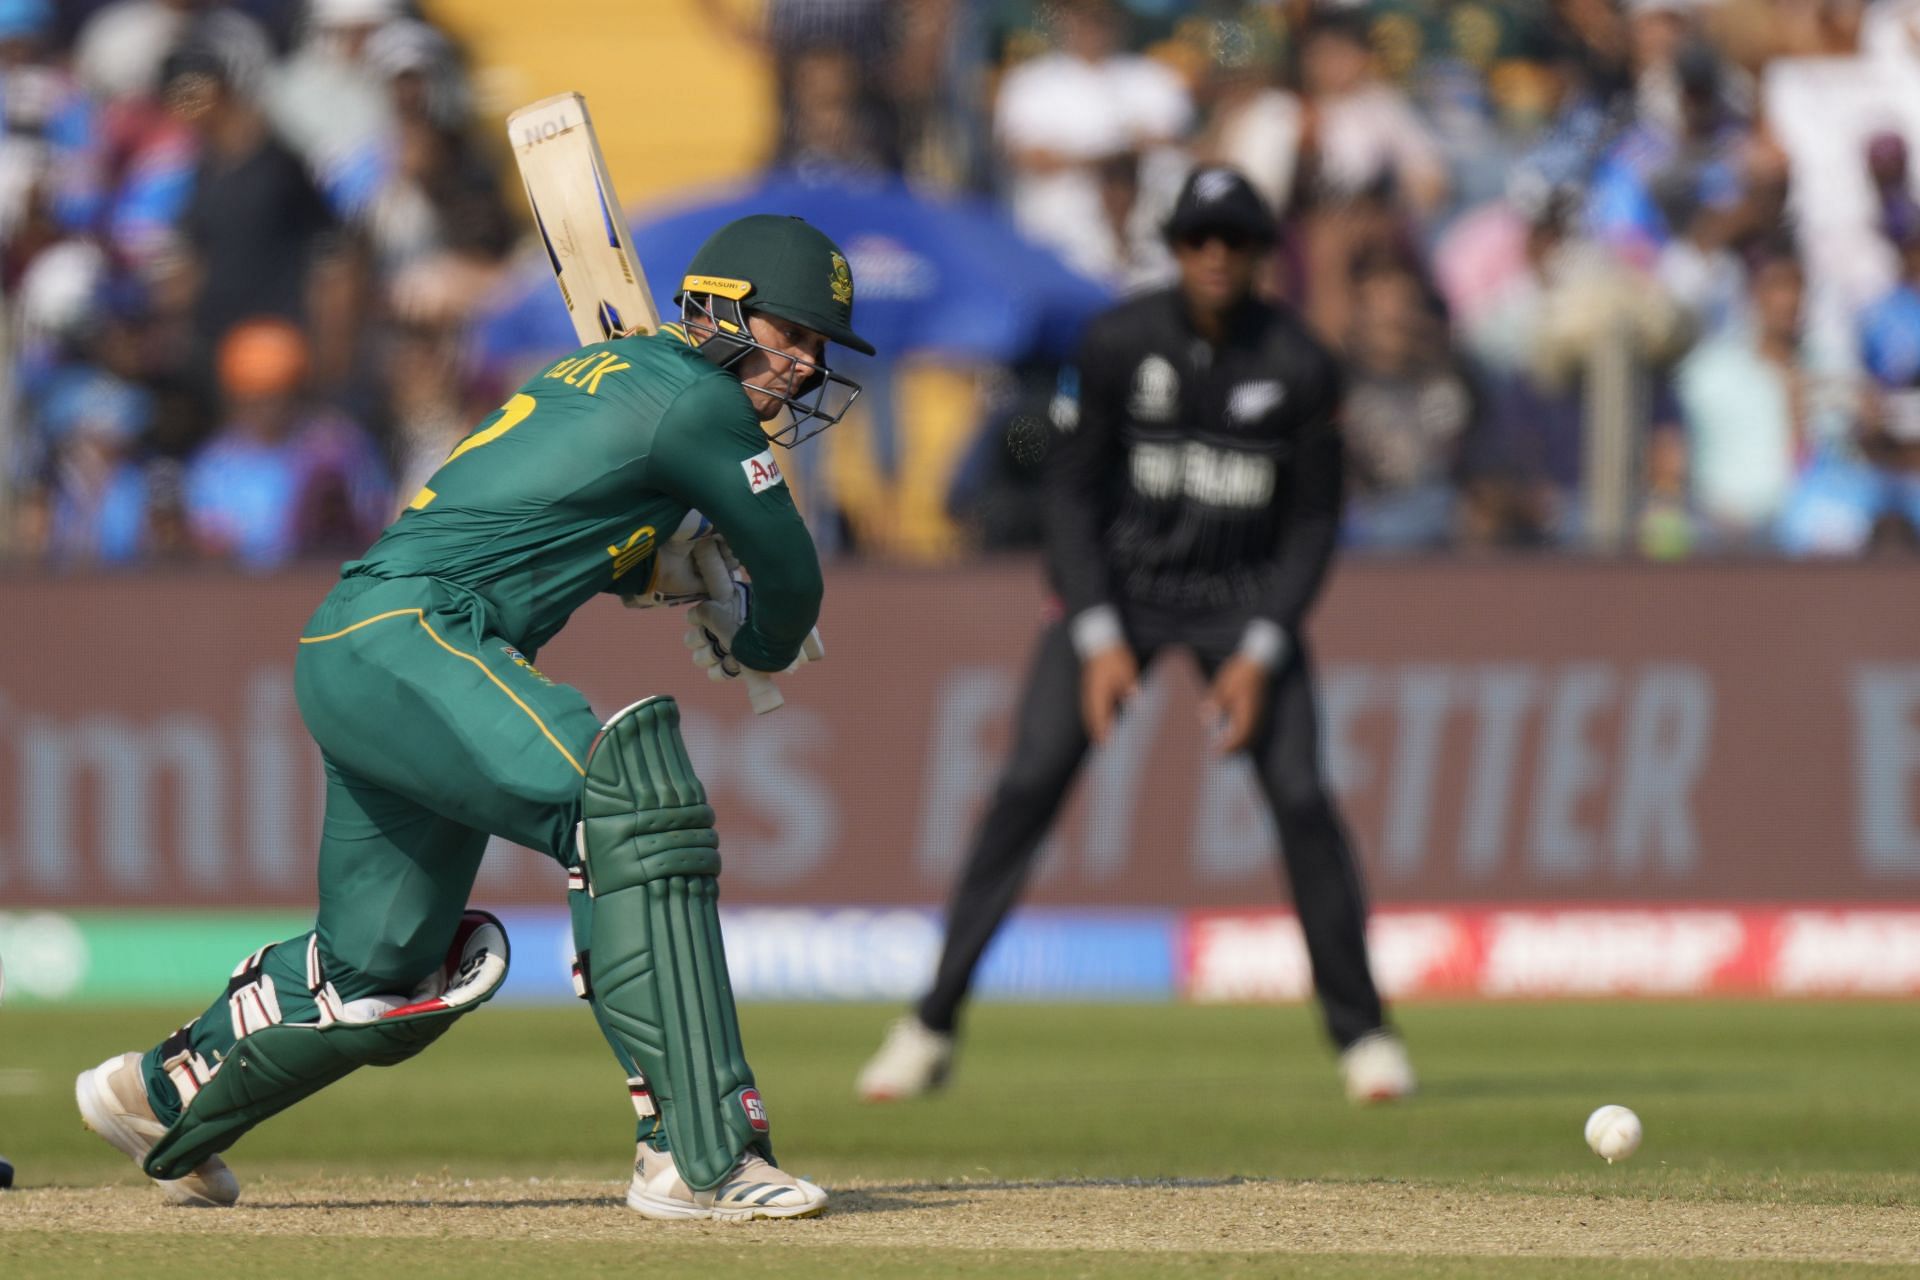 India will want to see the back Quinton de Kock early